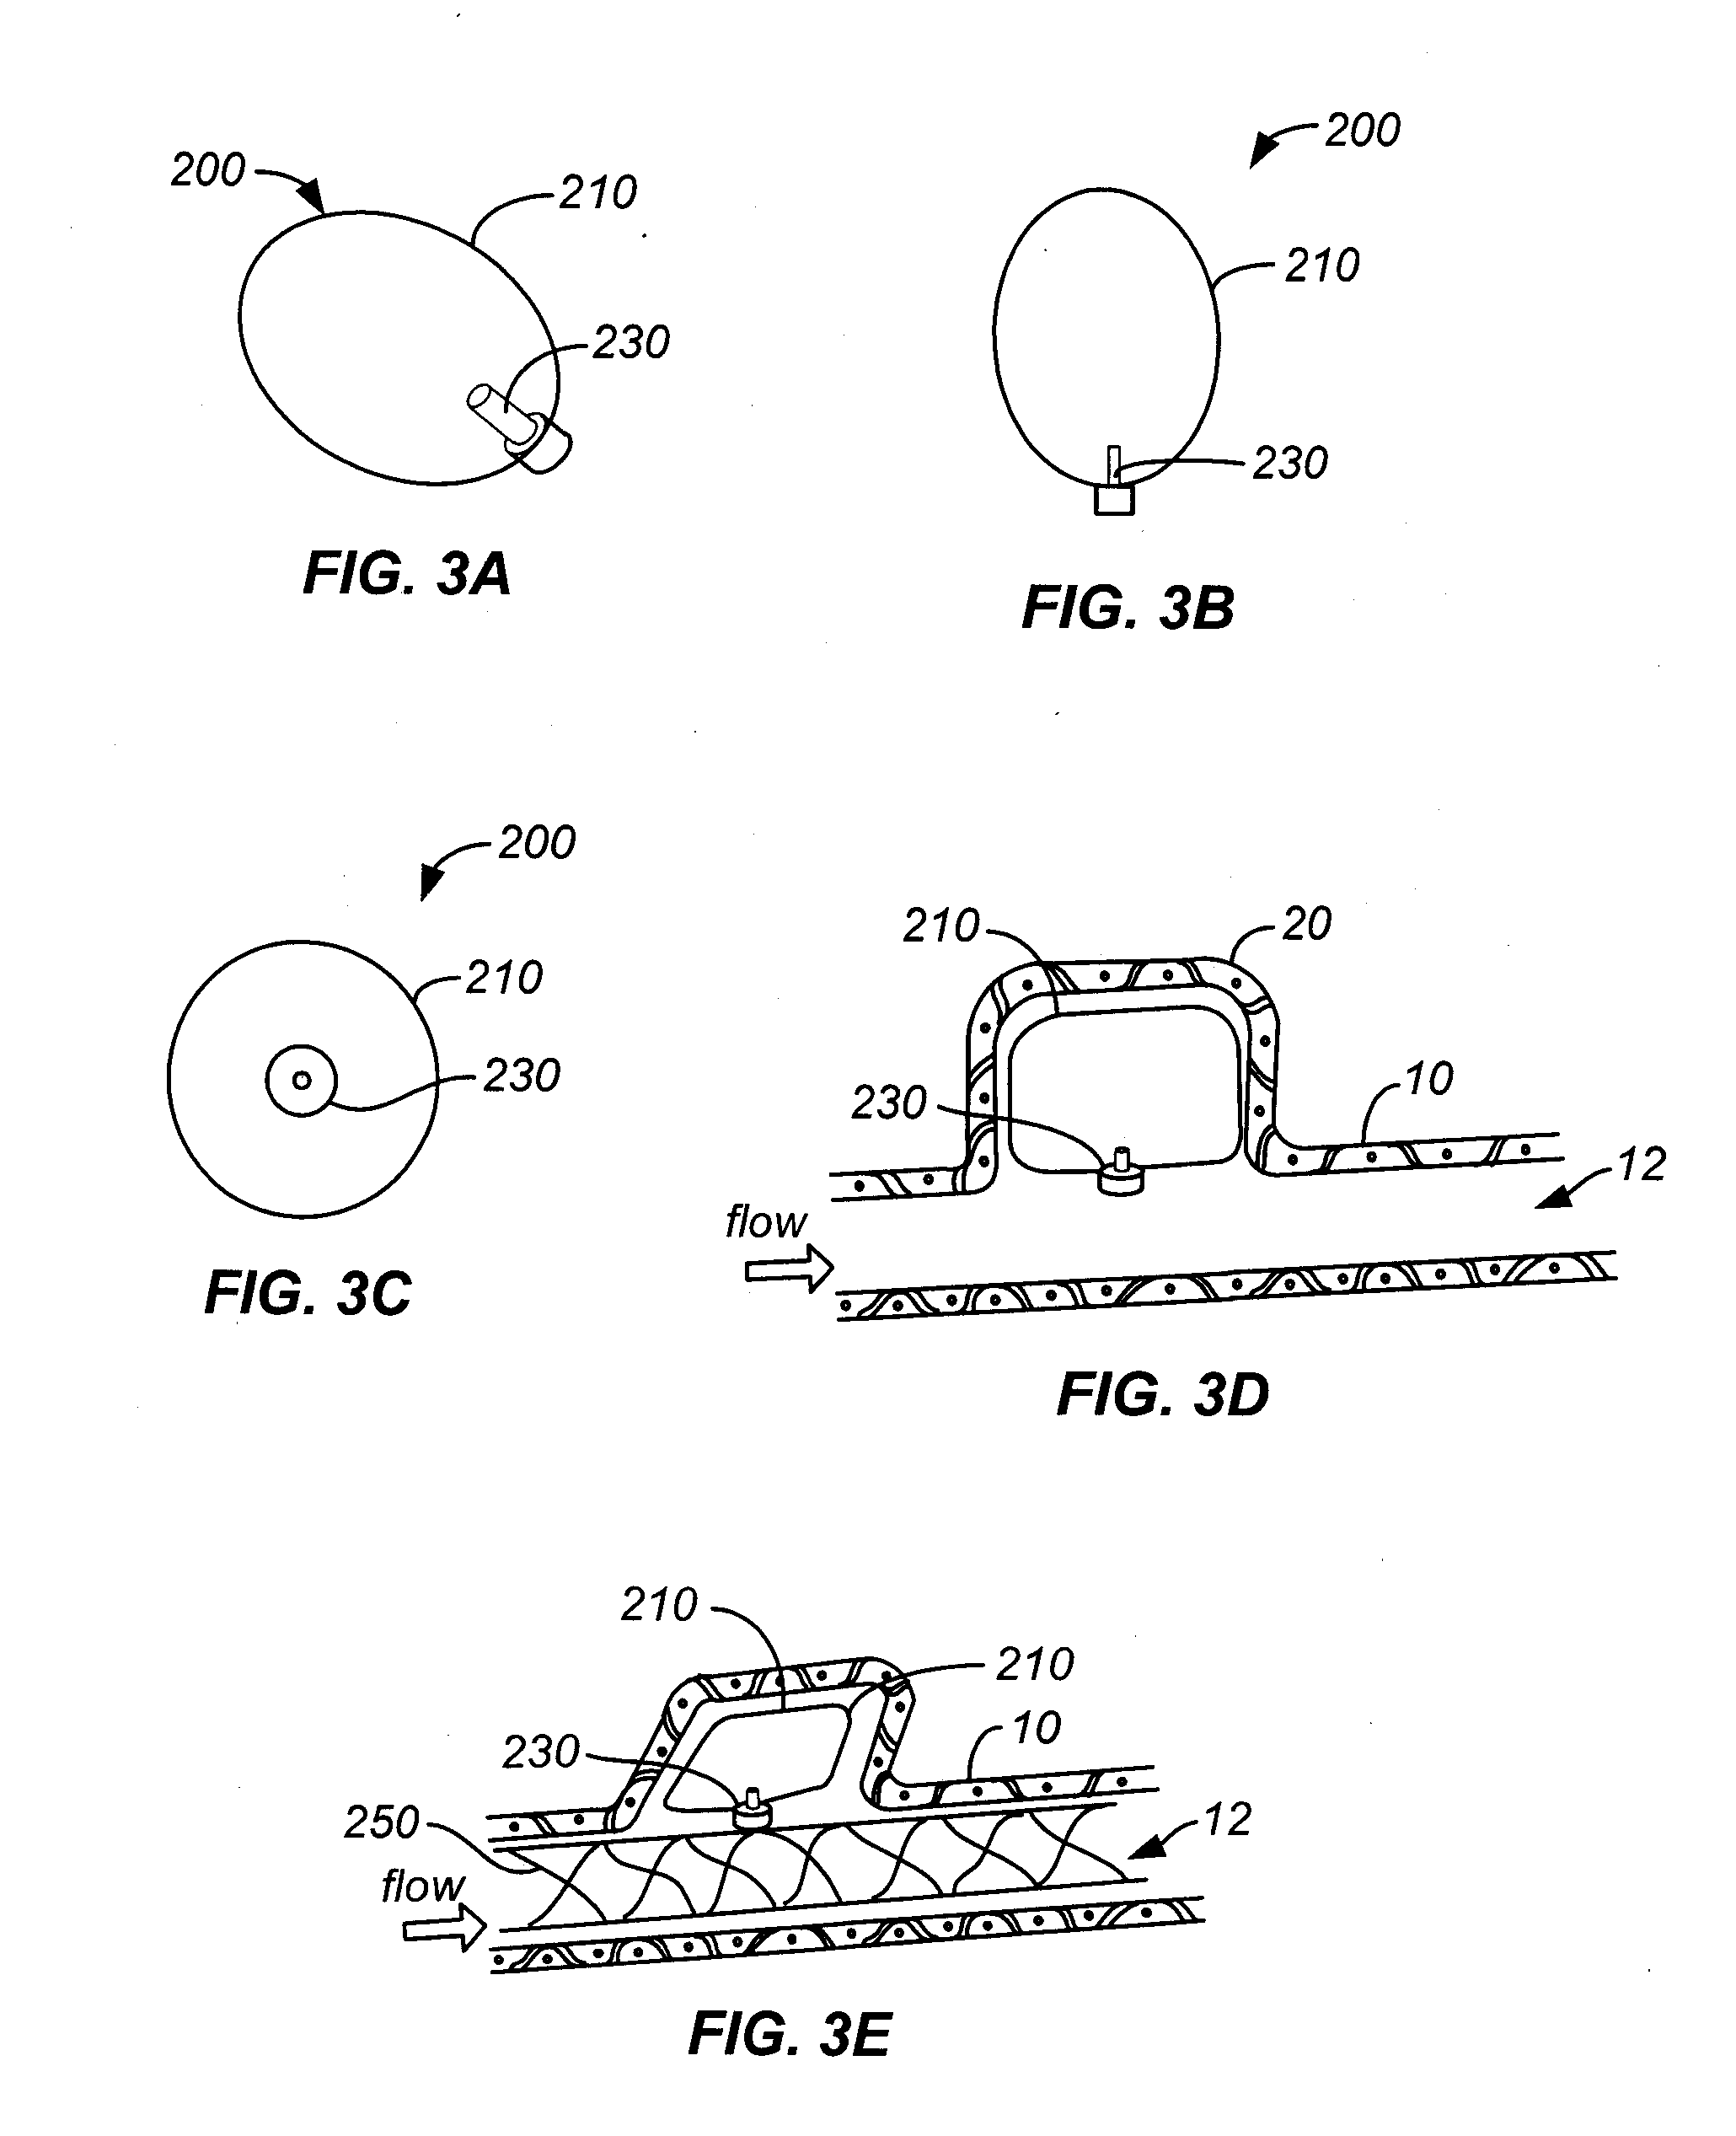 Aneurysm treatment devices and methods